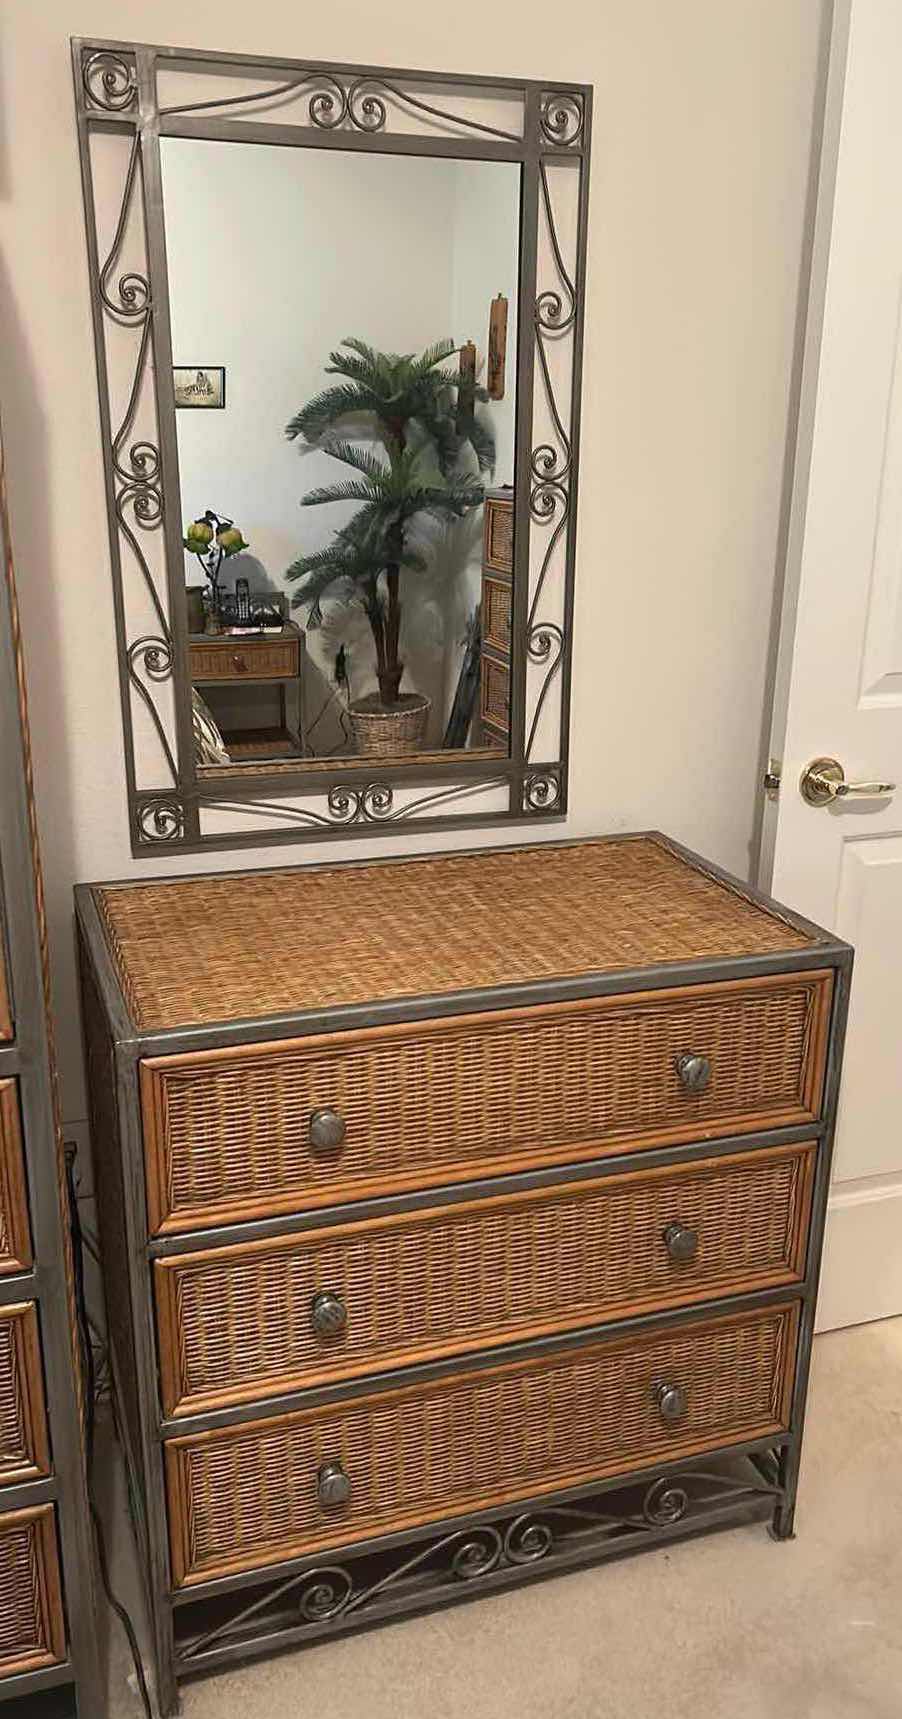 Photo 1 of RATAN AND METAL CHEST OF DRAWERS 32” x 20” x 32” AND METAL MIRROR 2’ x 3’